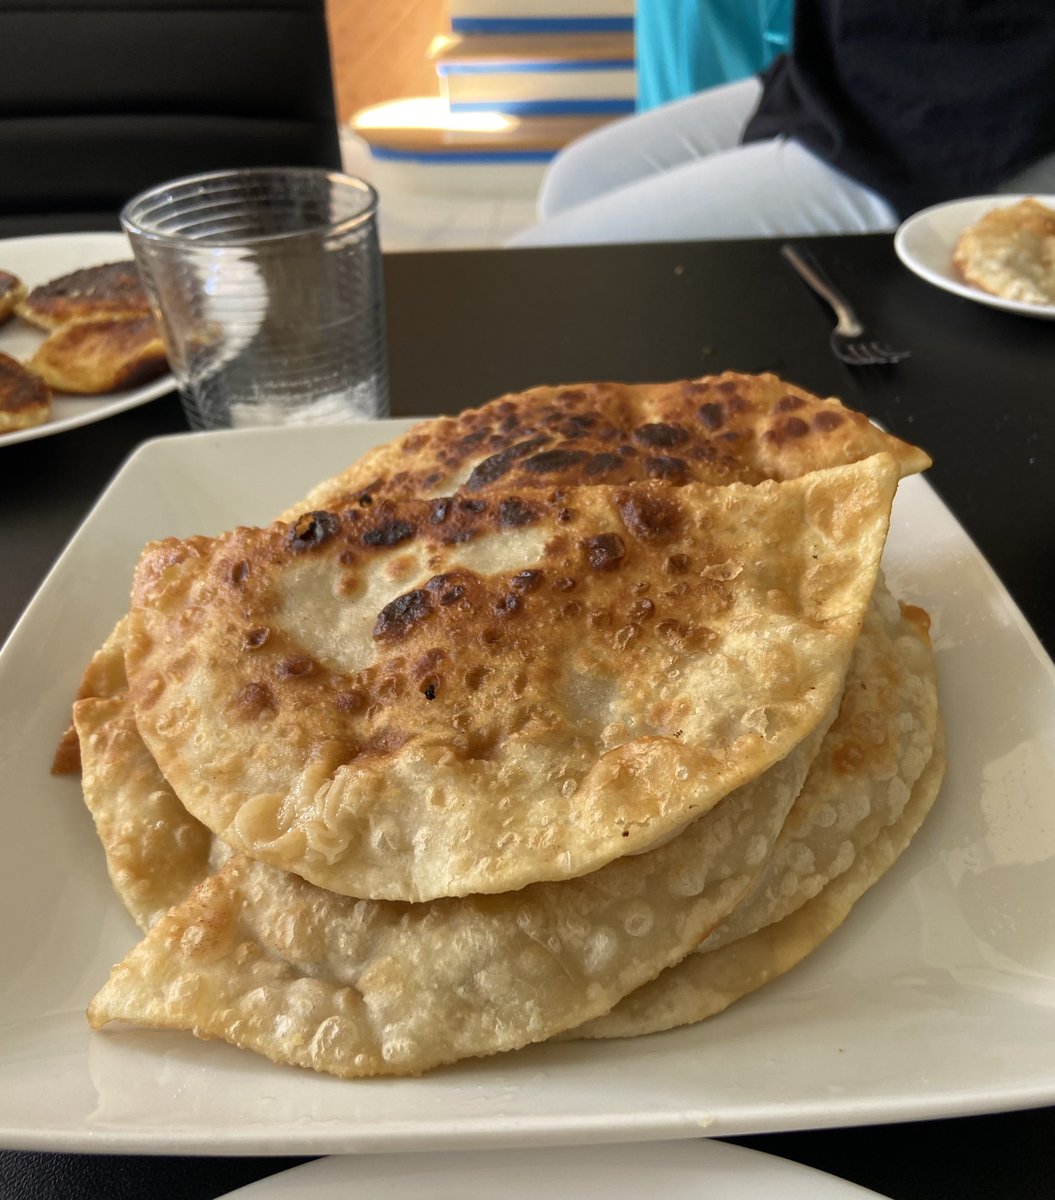 Did you know #chebureki is the national dish of the #CrimeanTatars? In recent days, I had the pleasure of being treated to this #comfort #food in the home of Crimean Tatars in the US #CrimeaisUkraine #чебуреки #КримцеУкраїна #Крим🥰🥰🥰